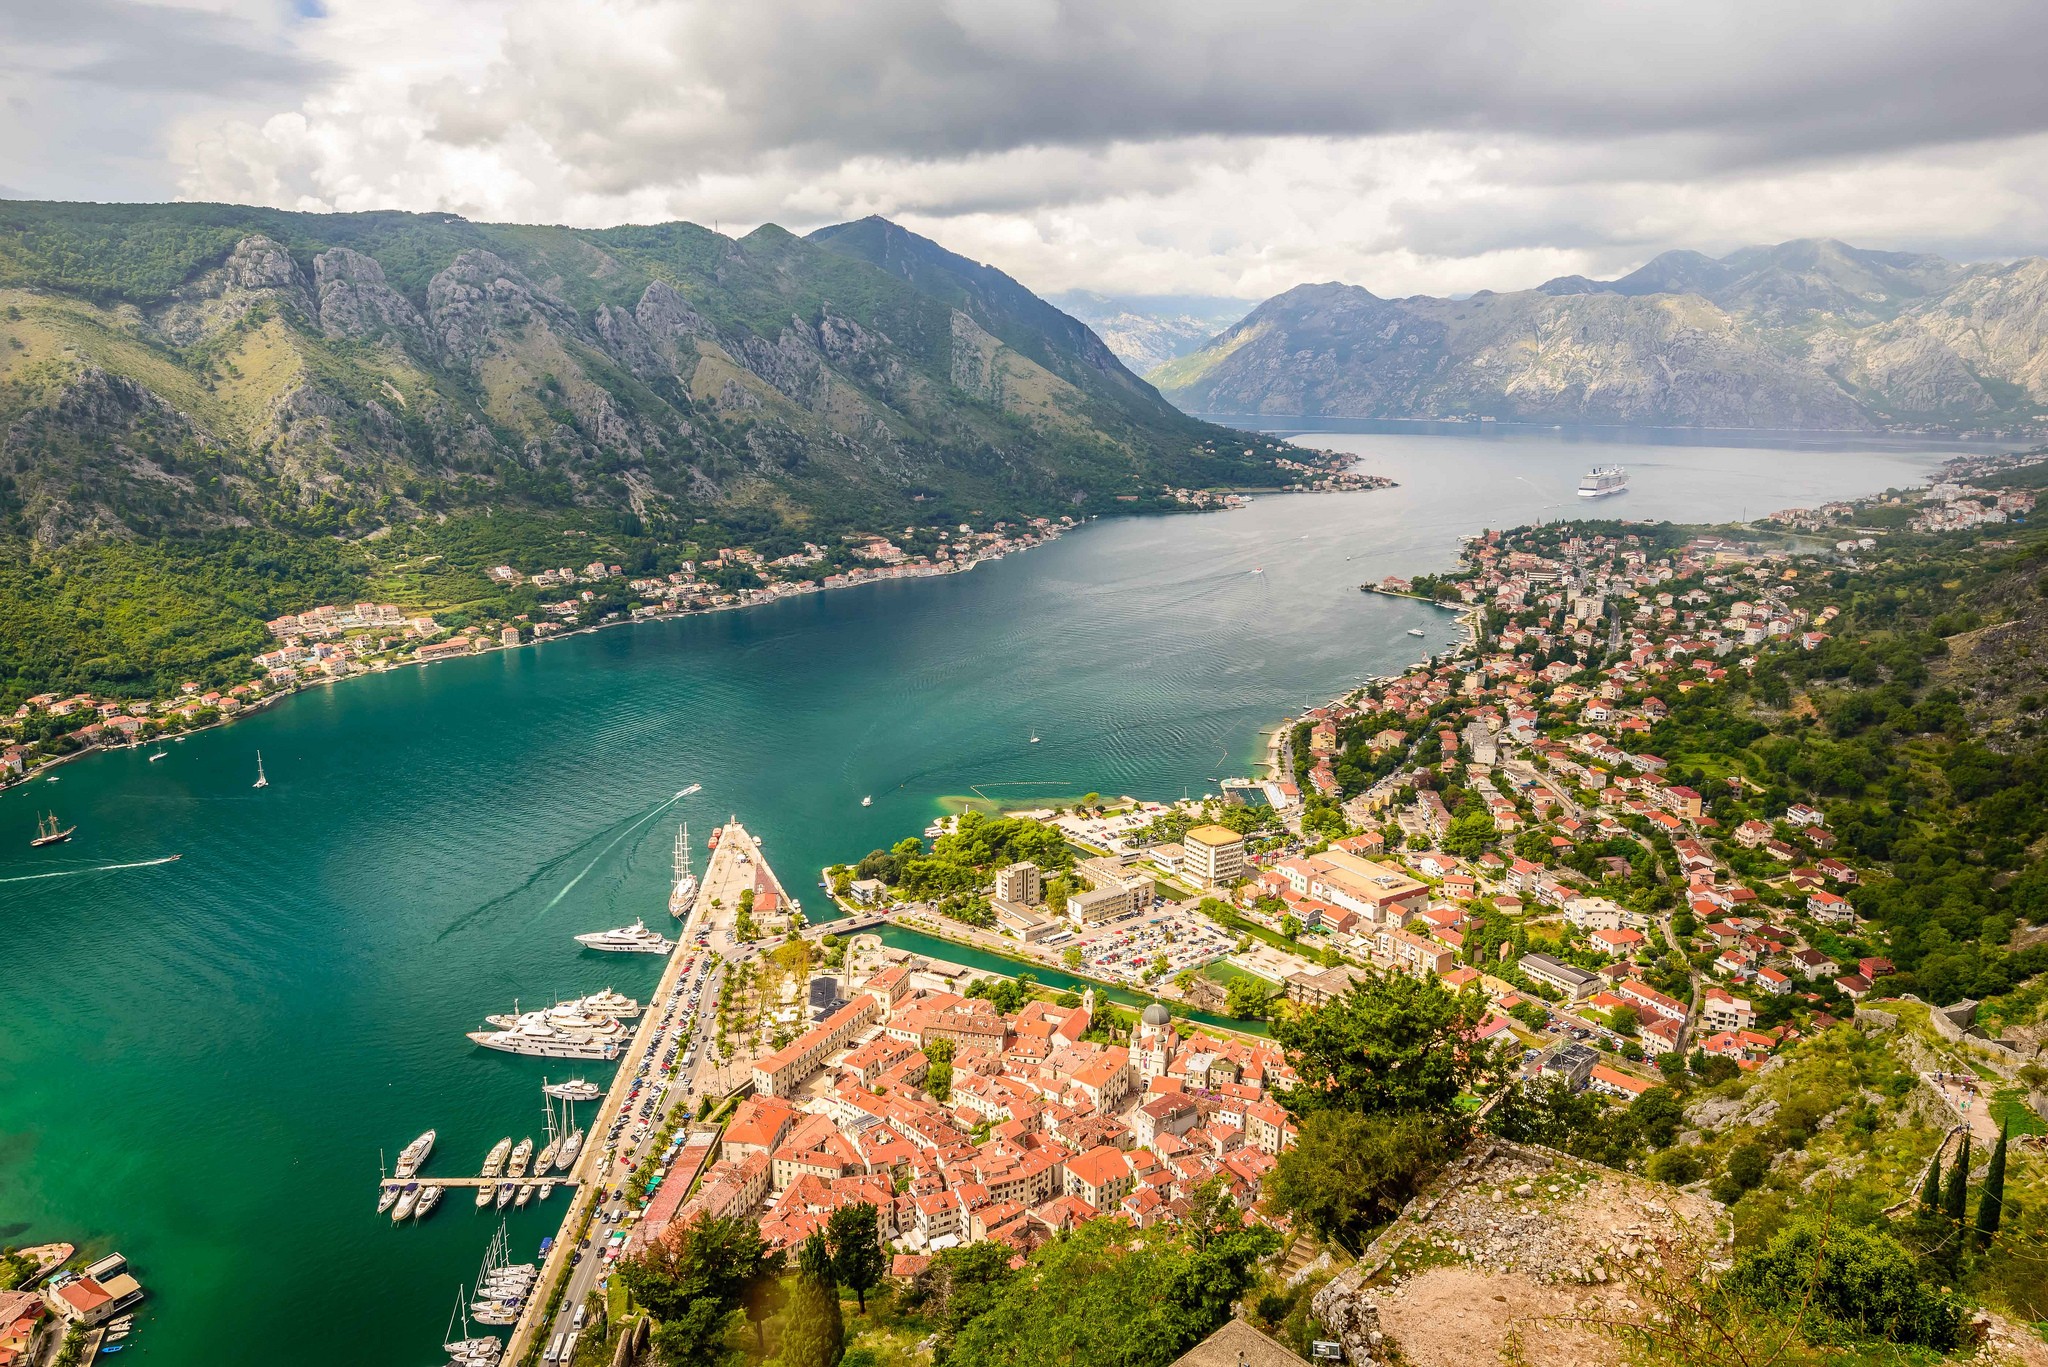 General 2048x1367 Montenegro city Kotor (town) bay Bay of Kotor aerial view landscape cityscape